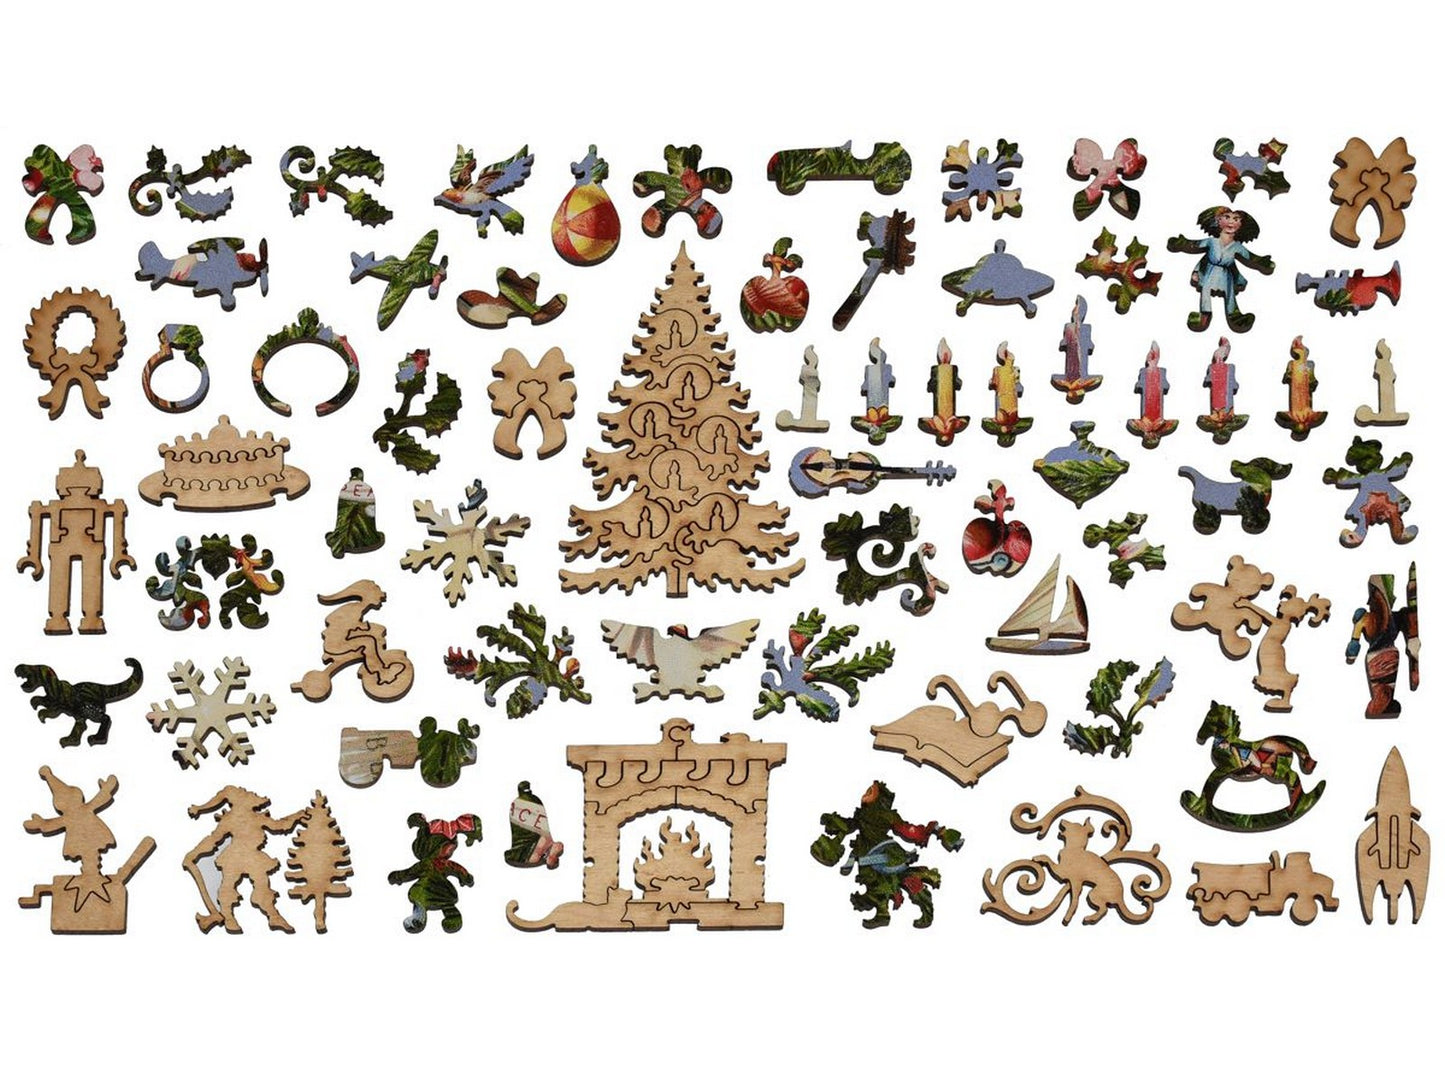 The whimsies that can be found in the puzzle, Victorian Christmas Tree.